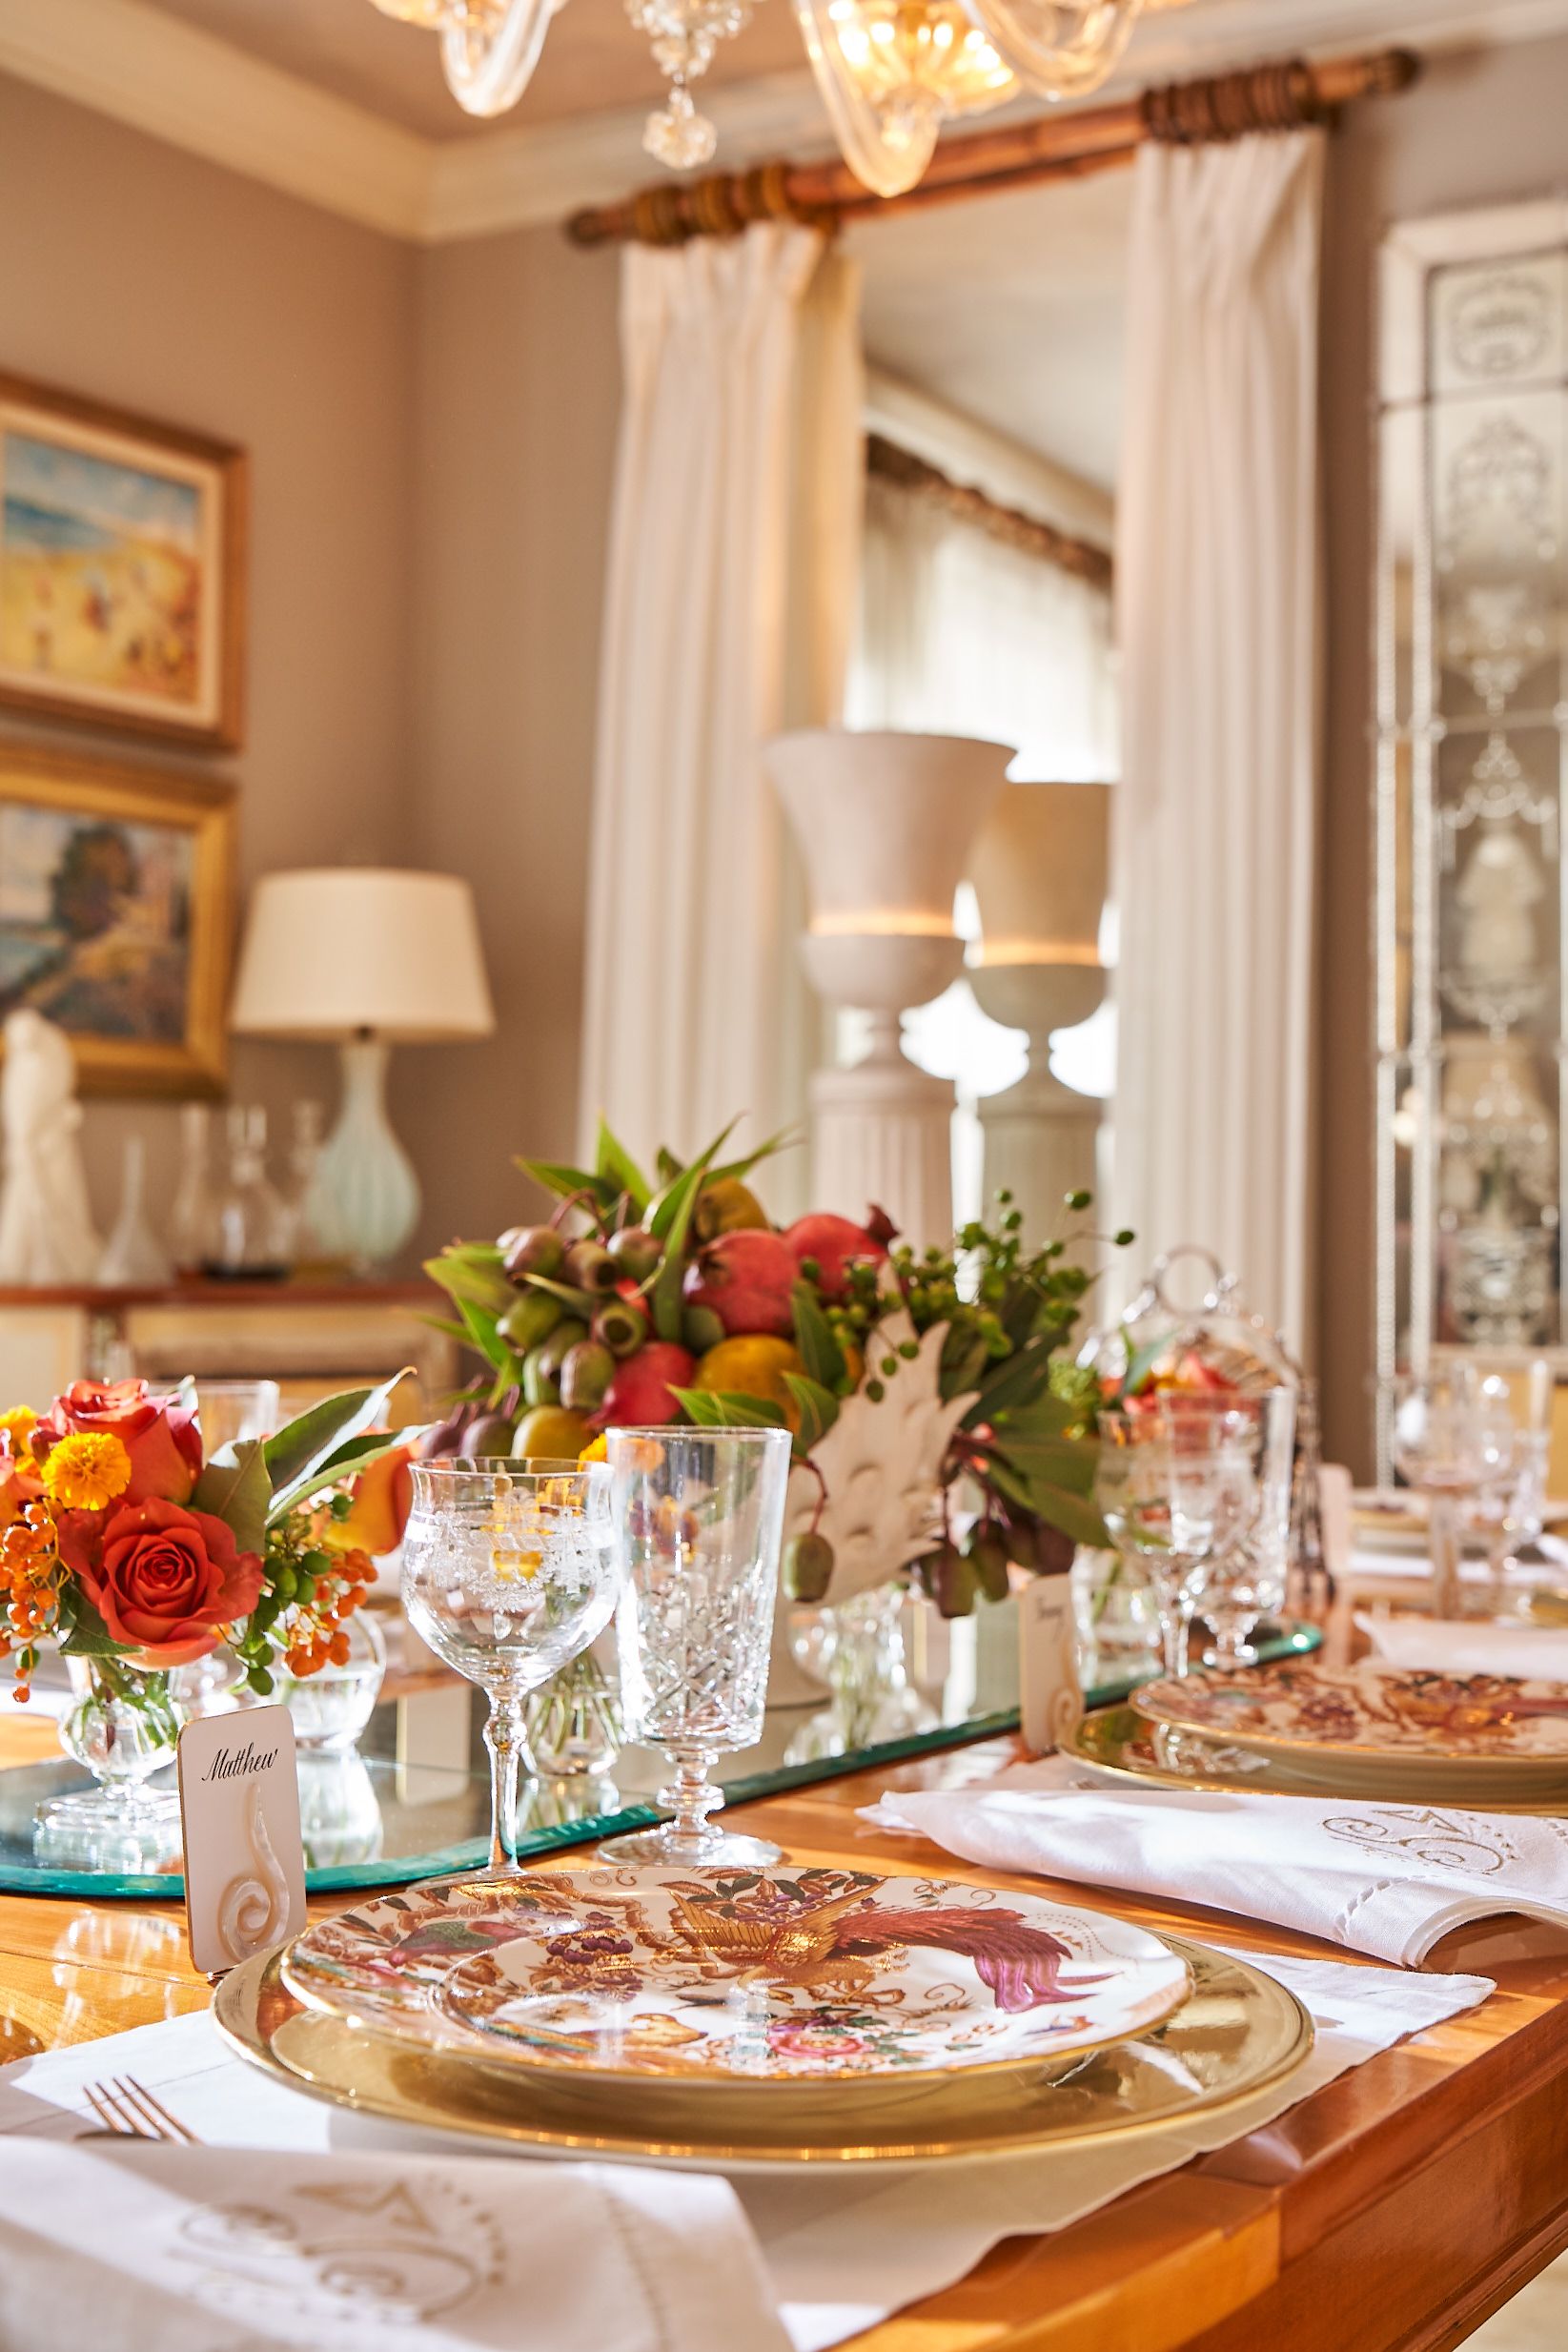 How To Decorate A Dining Table For Thanksgiving Leadersrooms